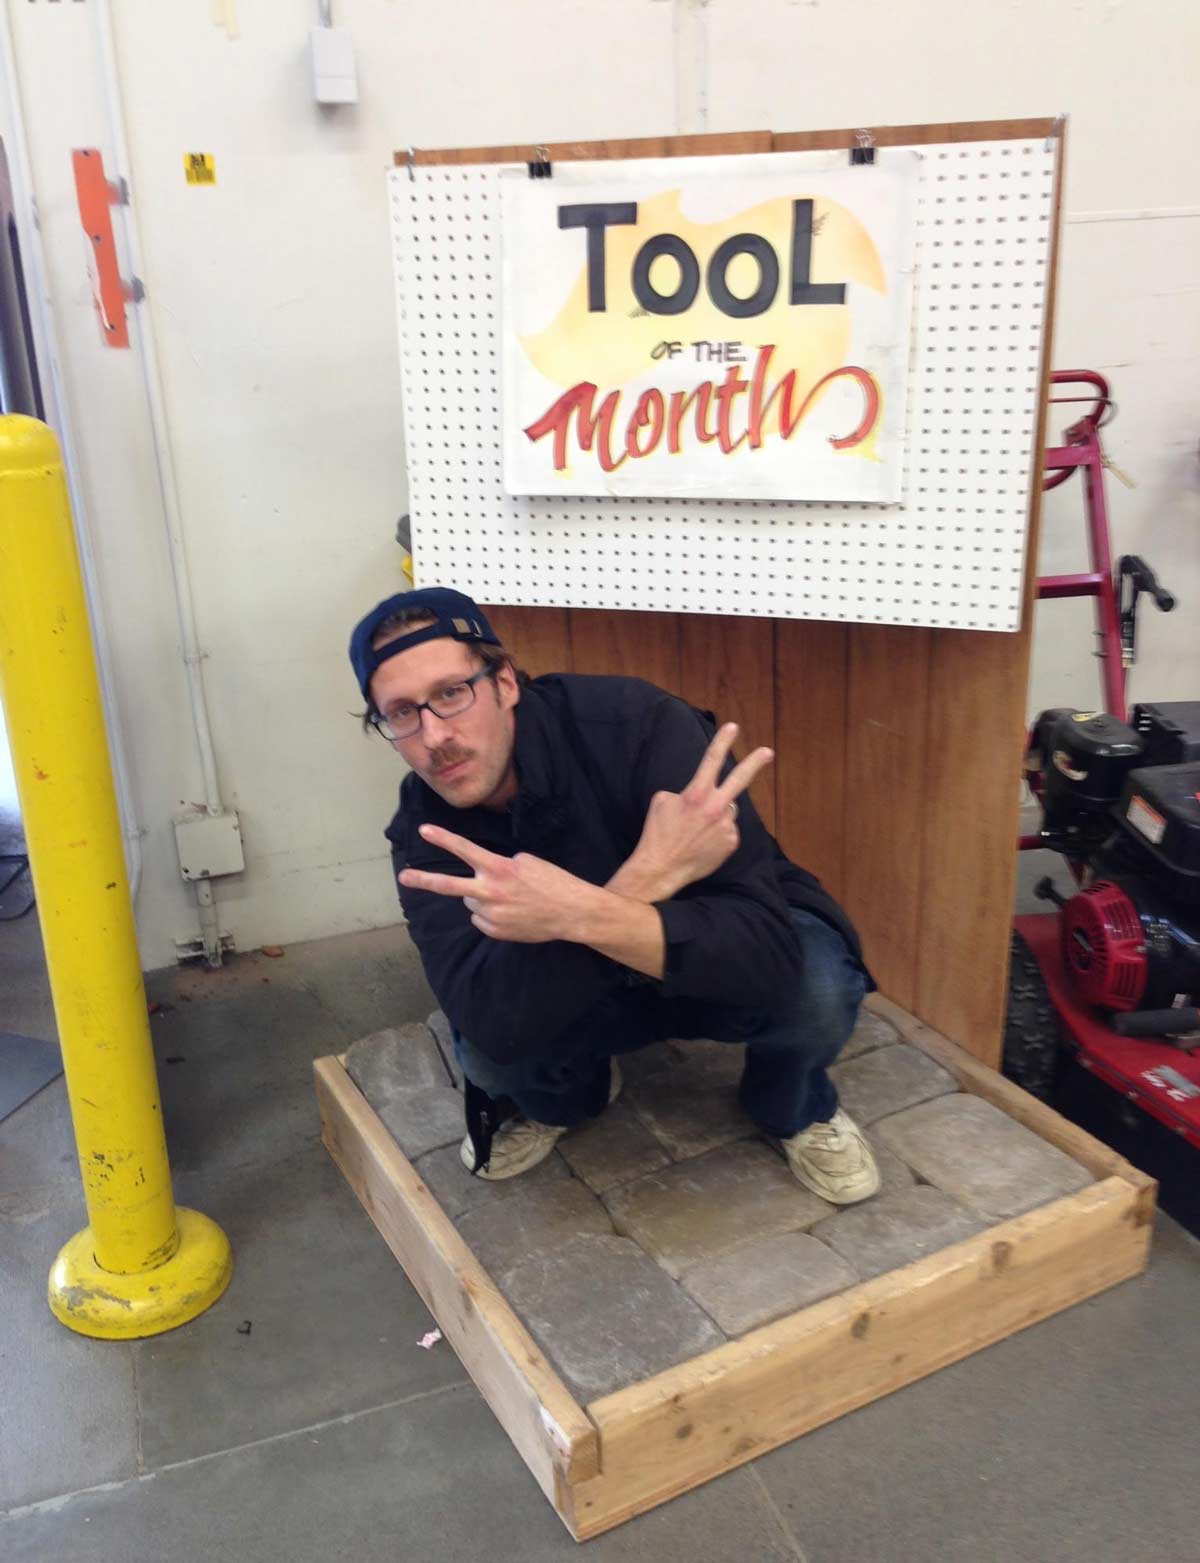 Tool of the month